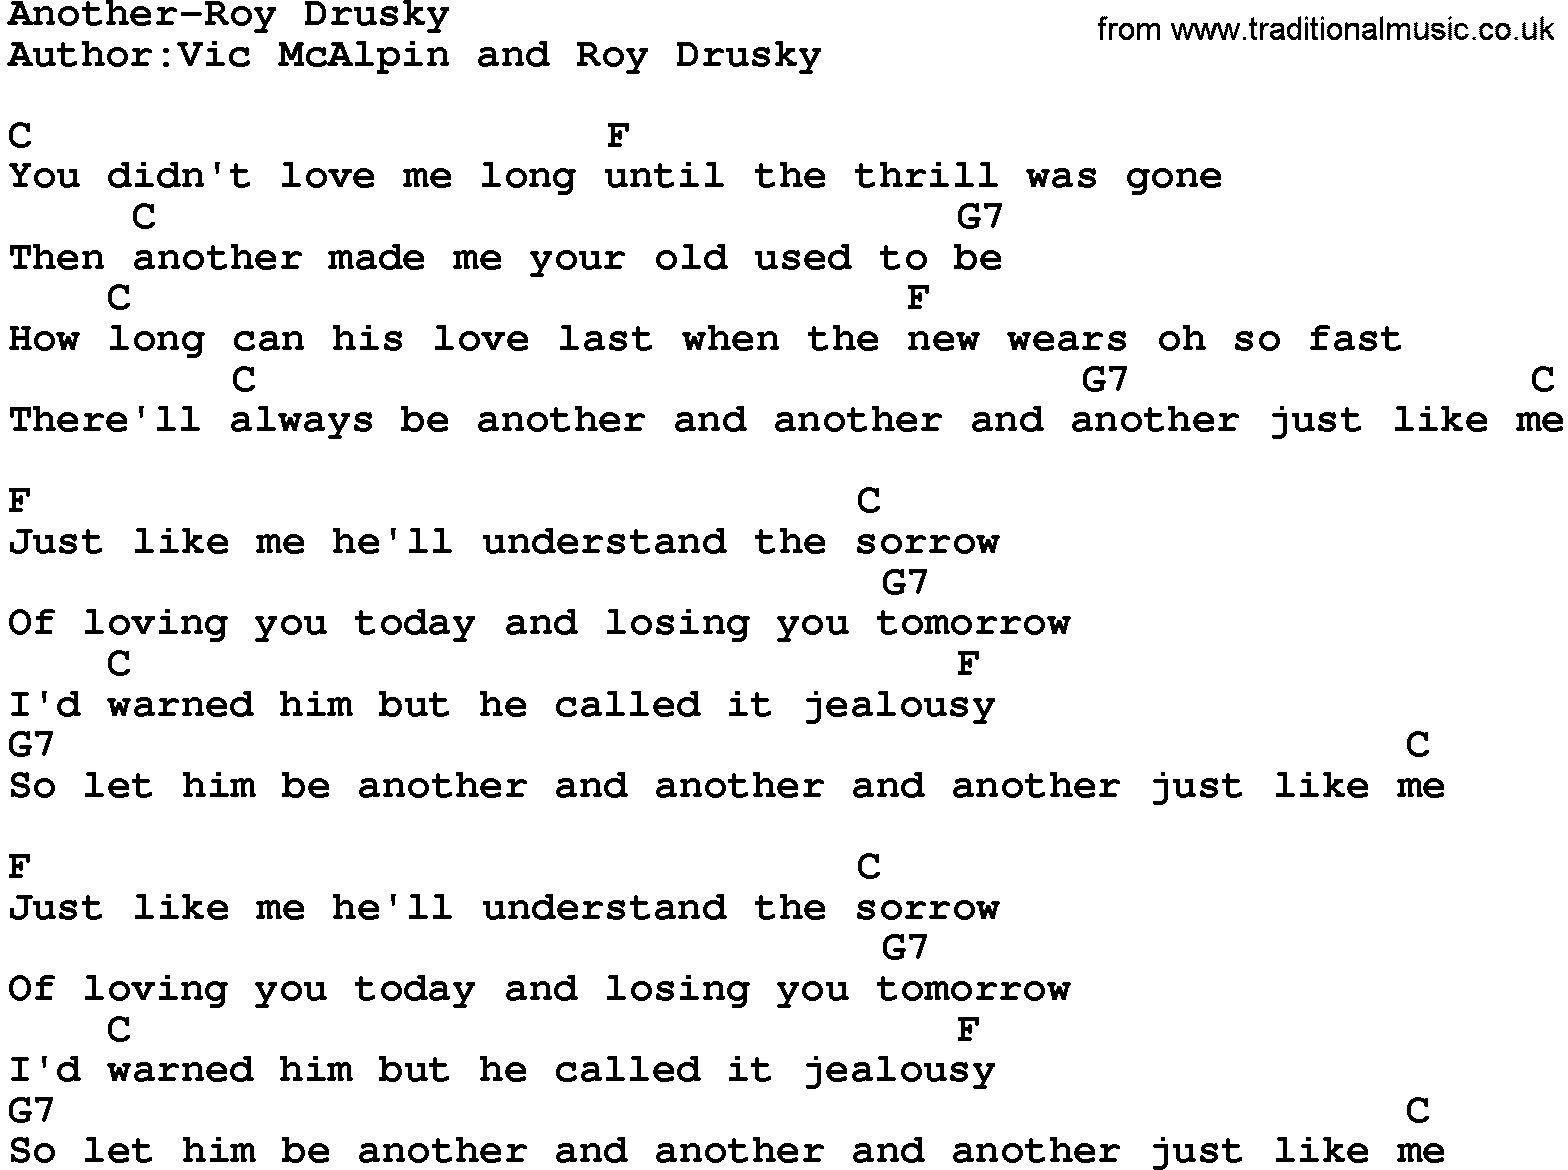 Country music song: Another-Roy Drusky lyrics and chords